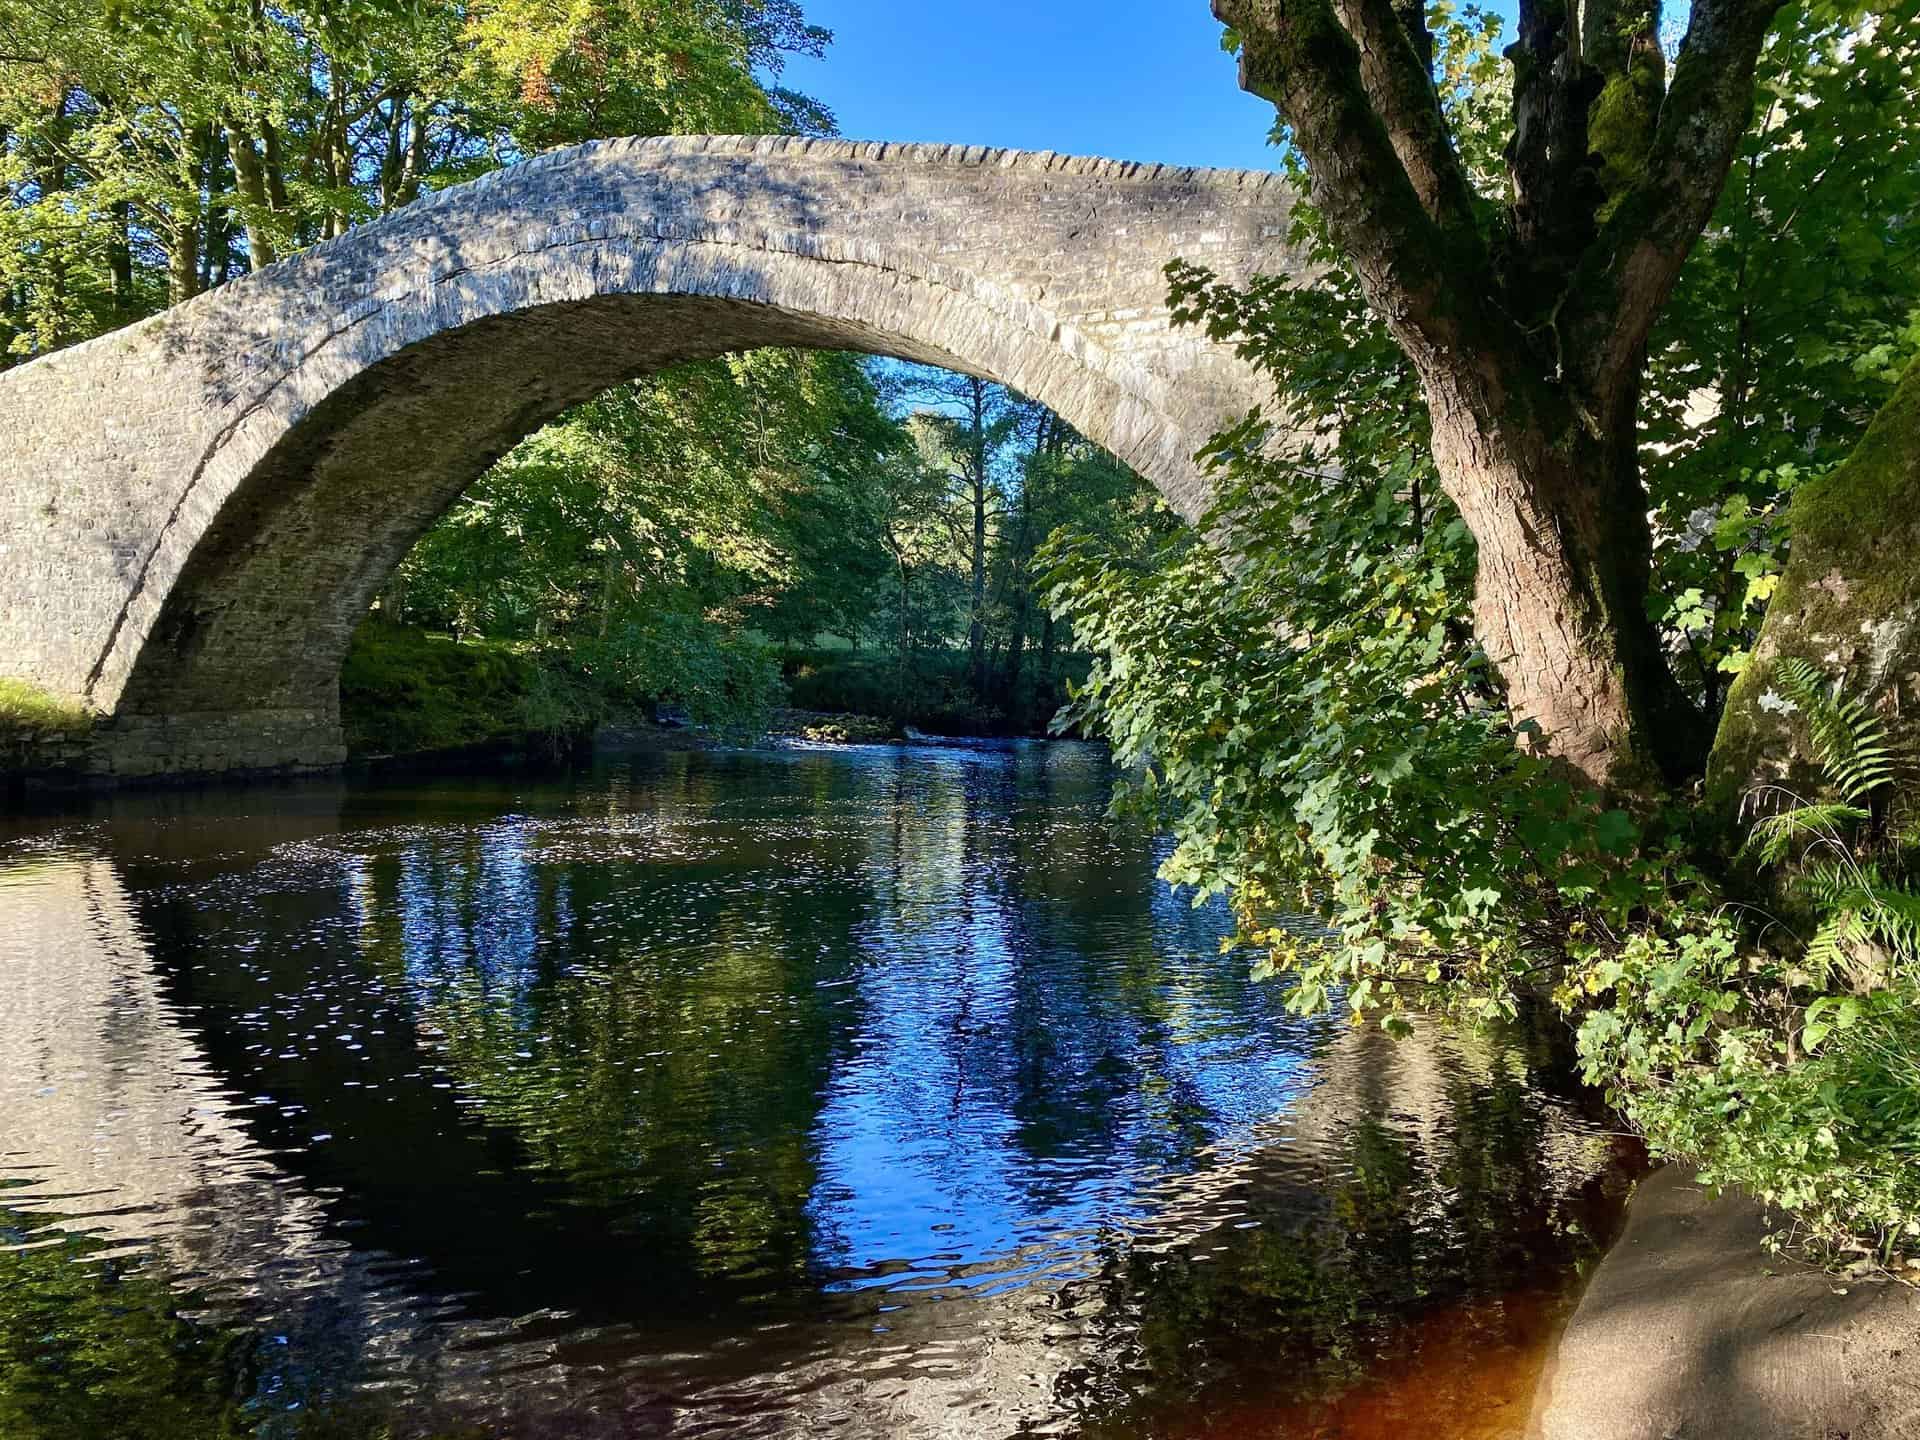 The picturesque Ivelet Bridge gracefully arches over the River Swale in Swaledale, North Yorkshire. Just a stone's throw from the quaint village of Gunnerside, its ancient stones are beautifully illuminated by the sunlight.